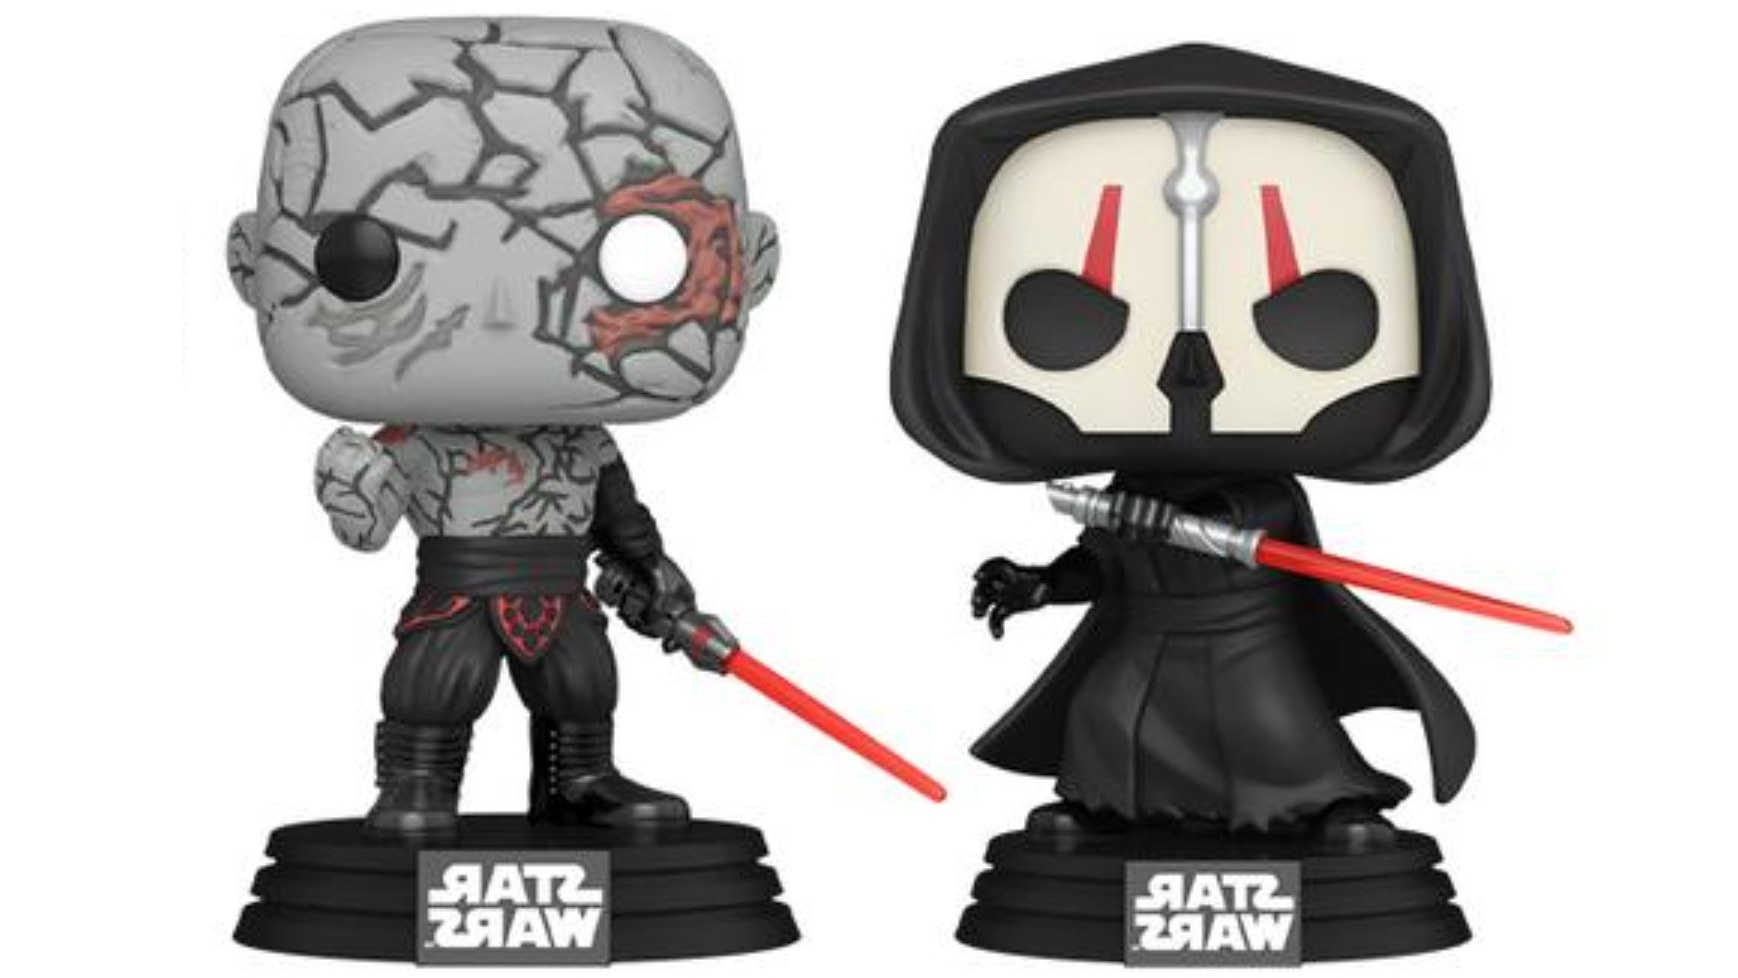 Nothing makes sense anymore: They’re making Funko Pops out of the cult classic 2004 Obsidian RPG, Star Wars: Knights of the Old Republic 2: The Sith Lords